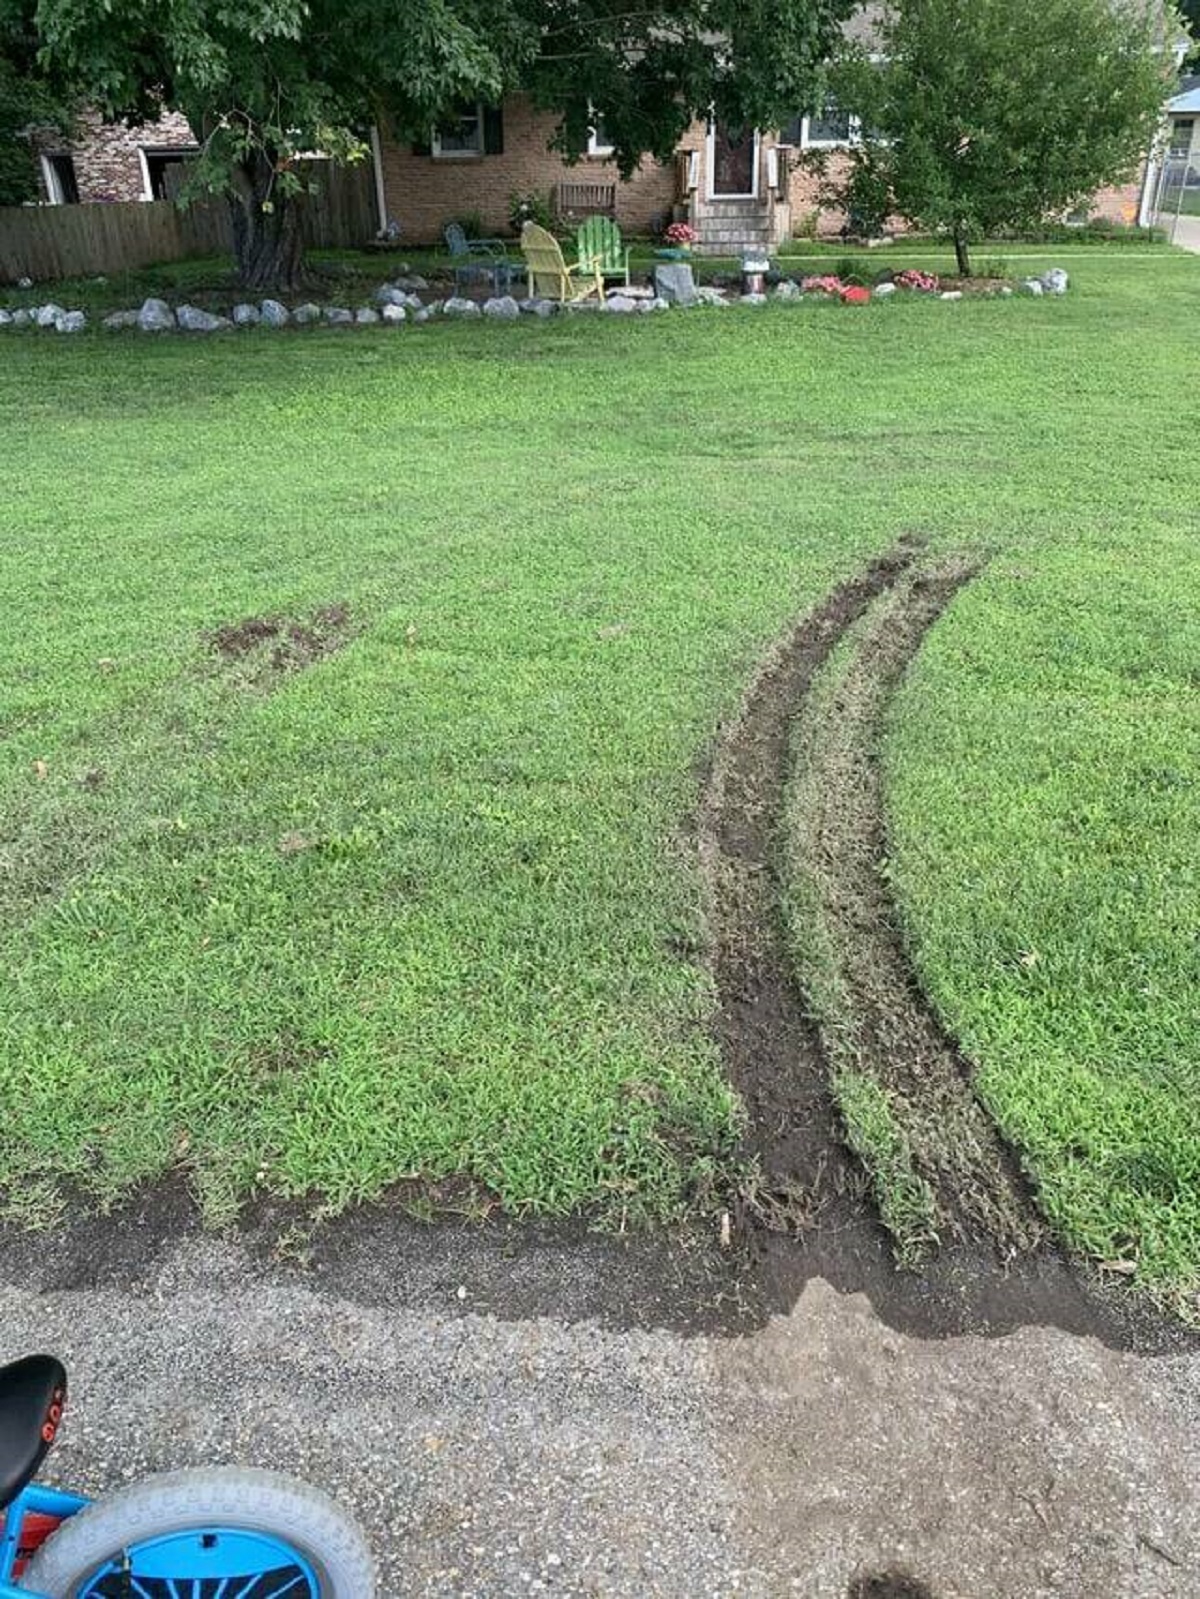 "FedEx destroyed my yard and I didn’t even order anything."